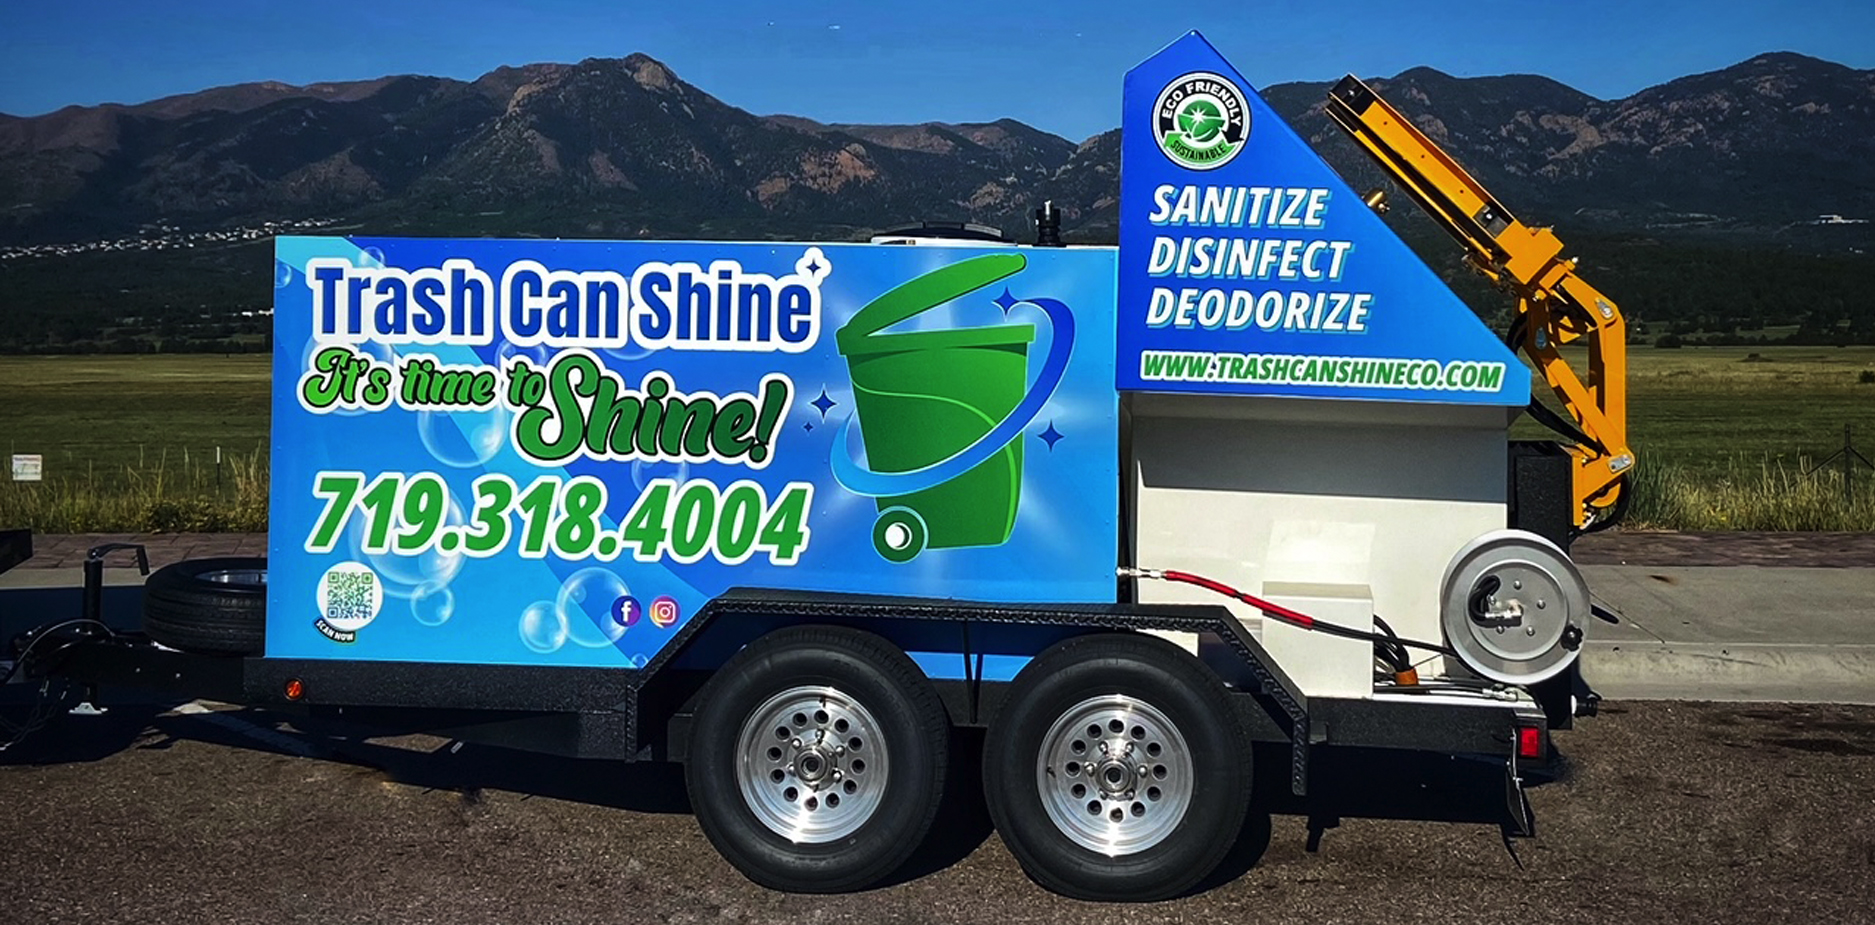 TRASH CAN CLEANING SERVICES